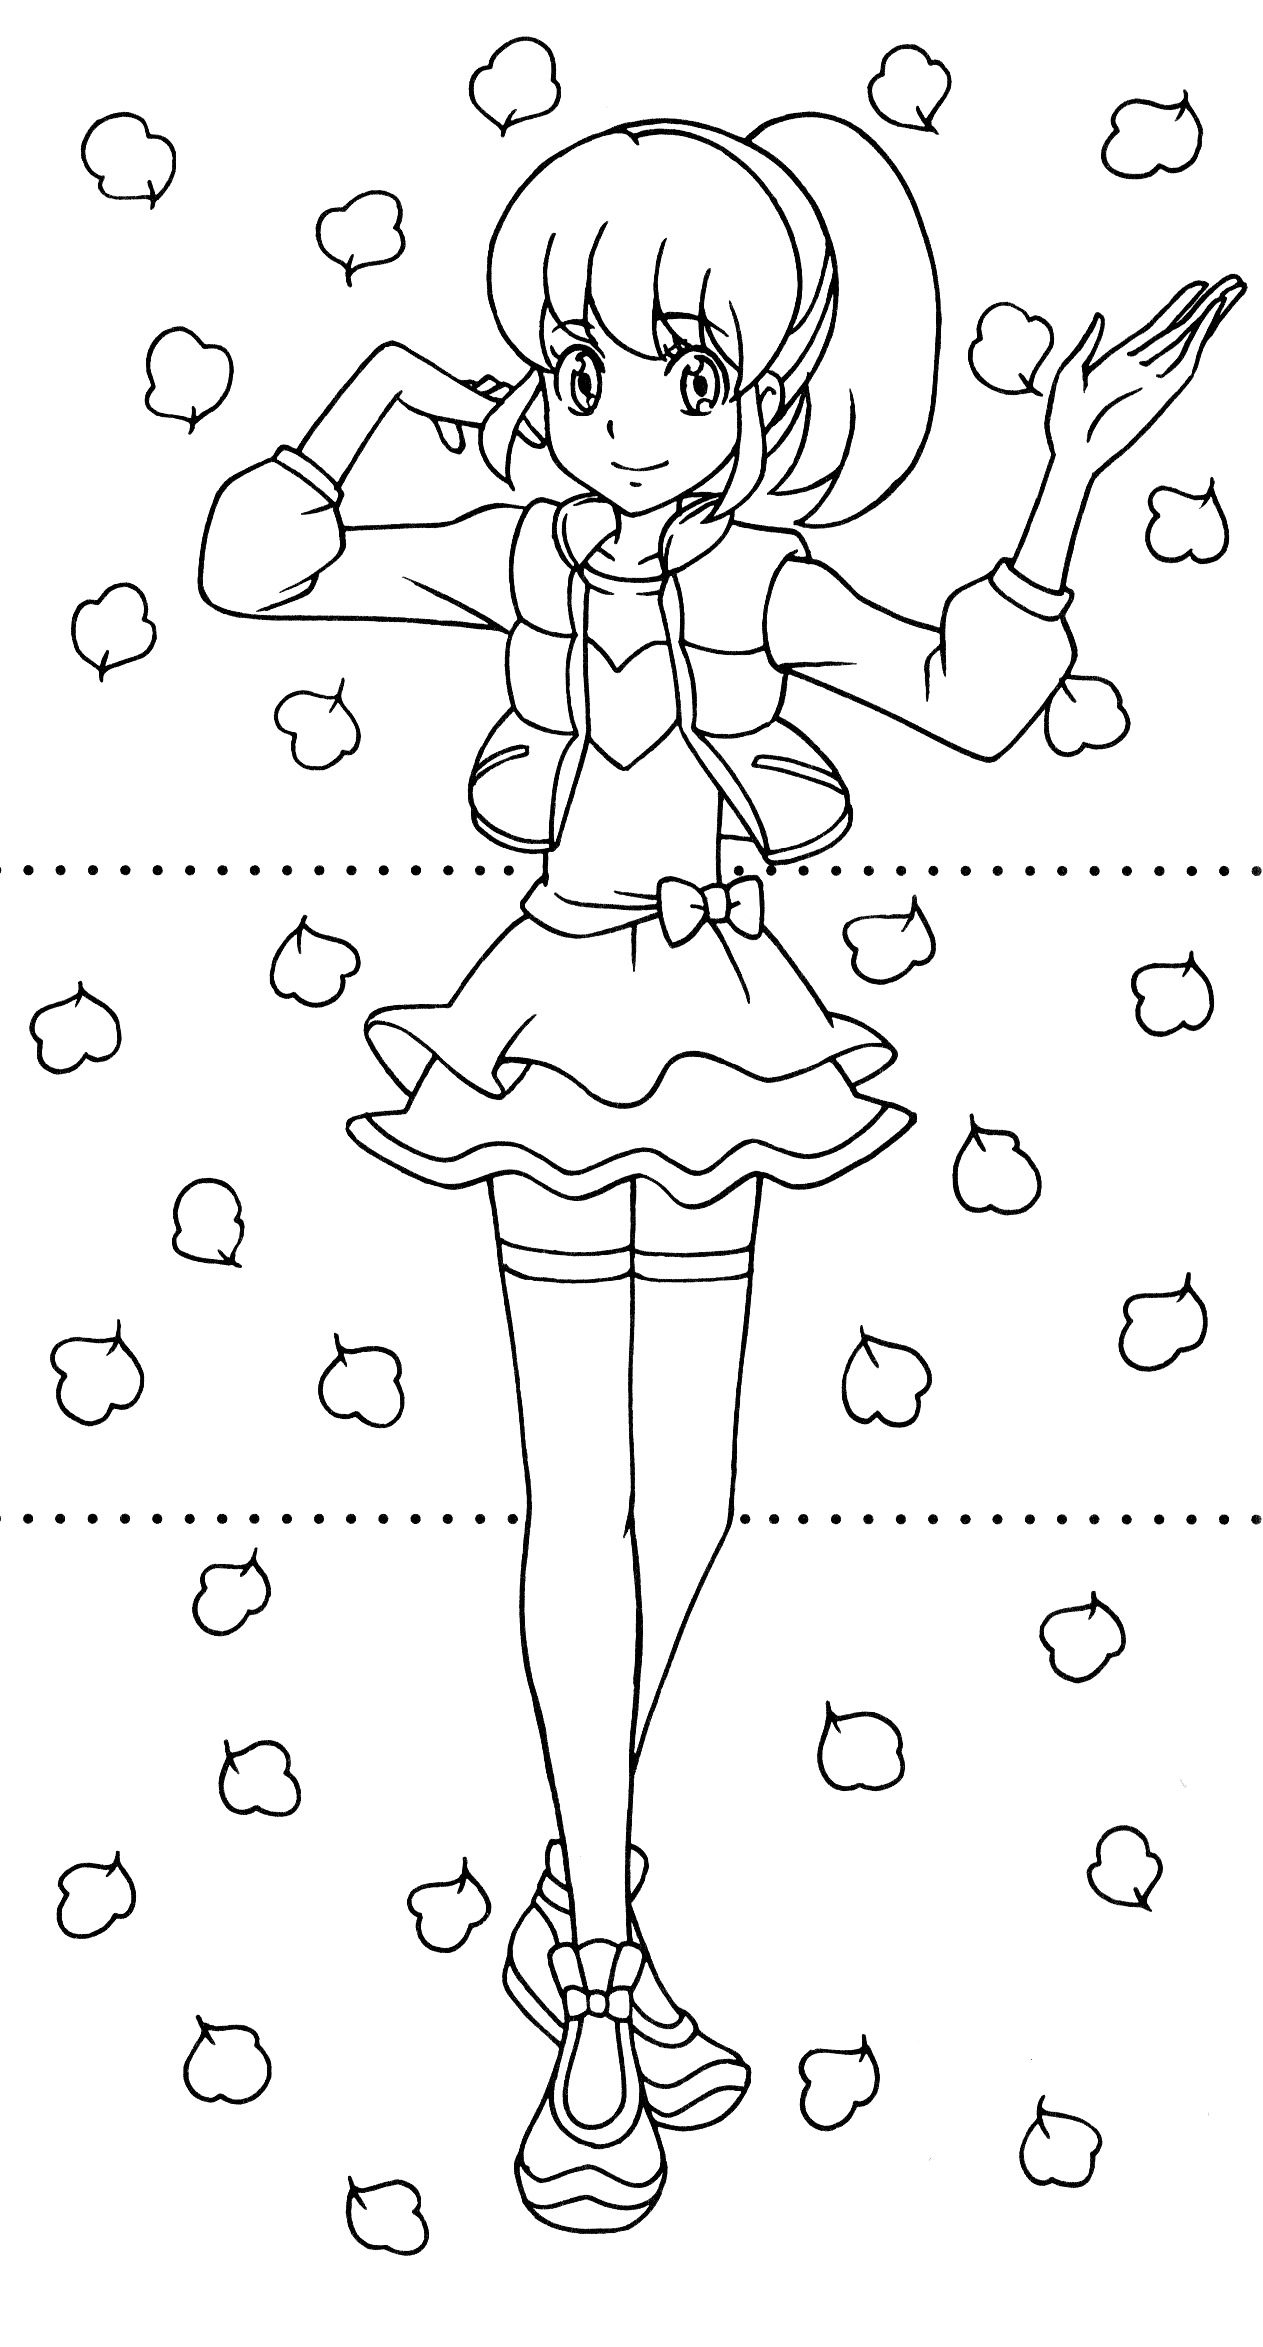 Happiness Charge Precure Dressup Coloring Book 20